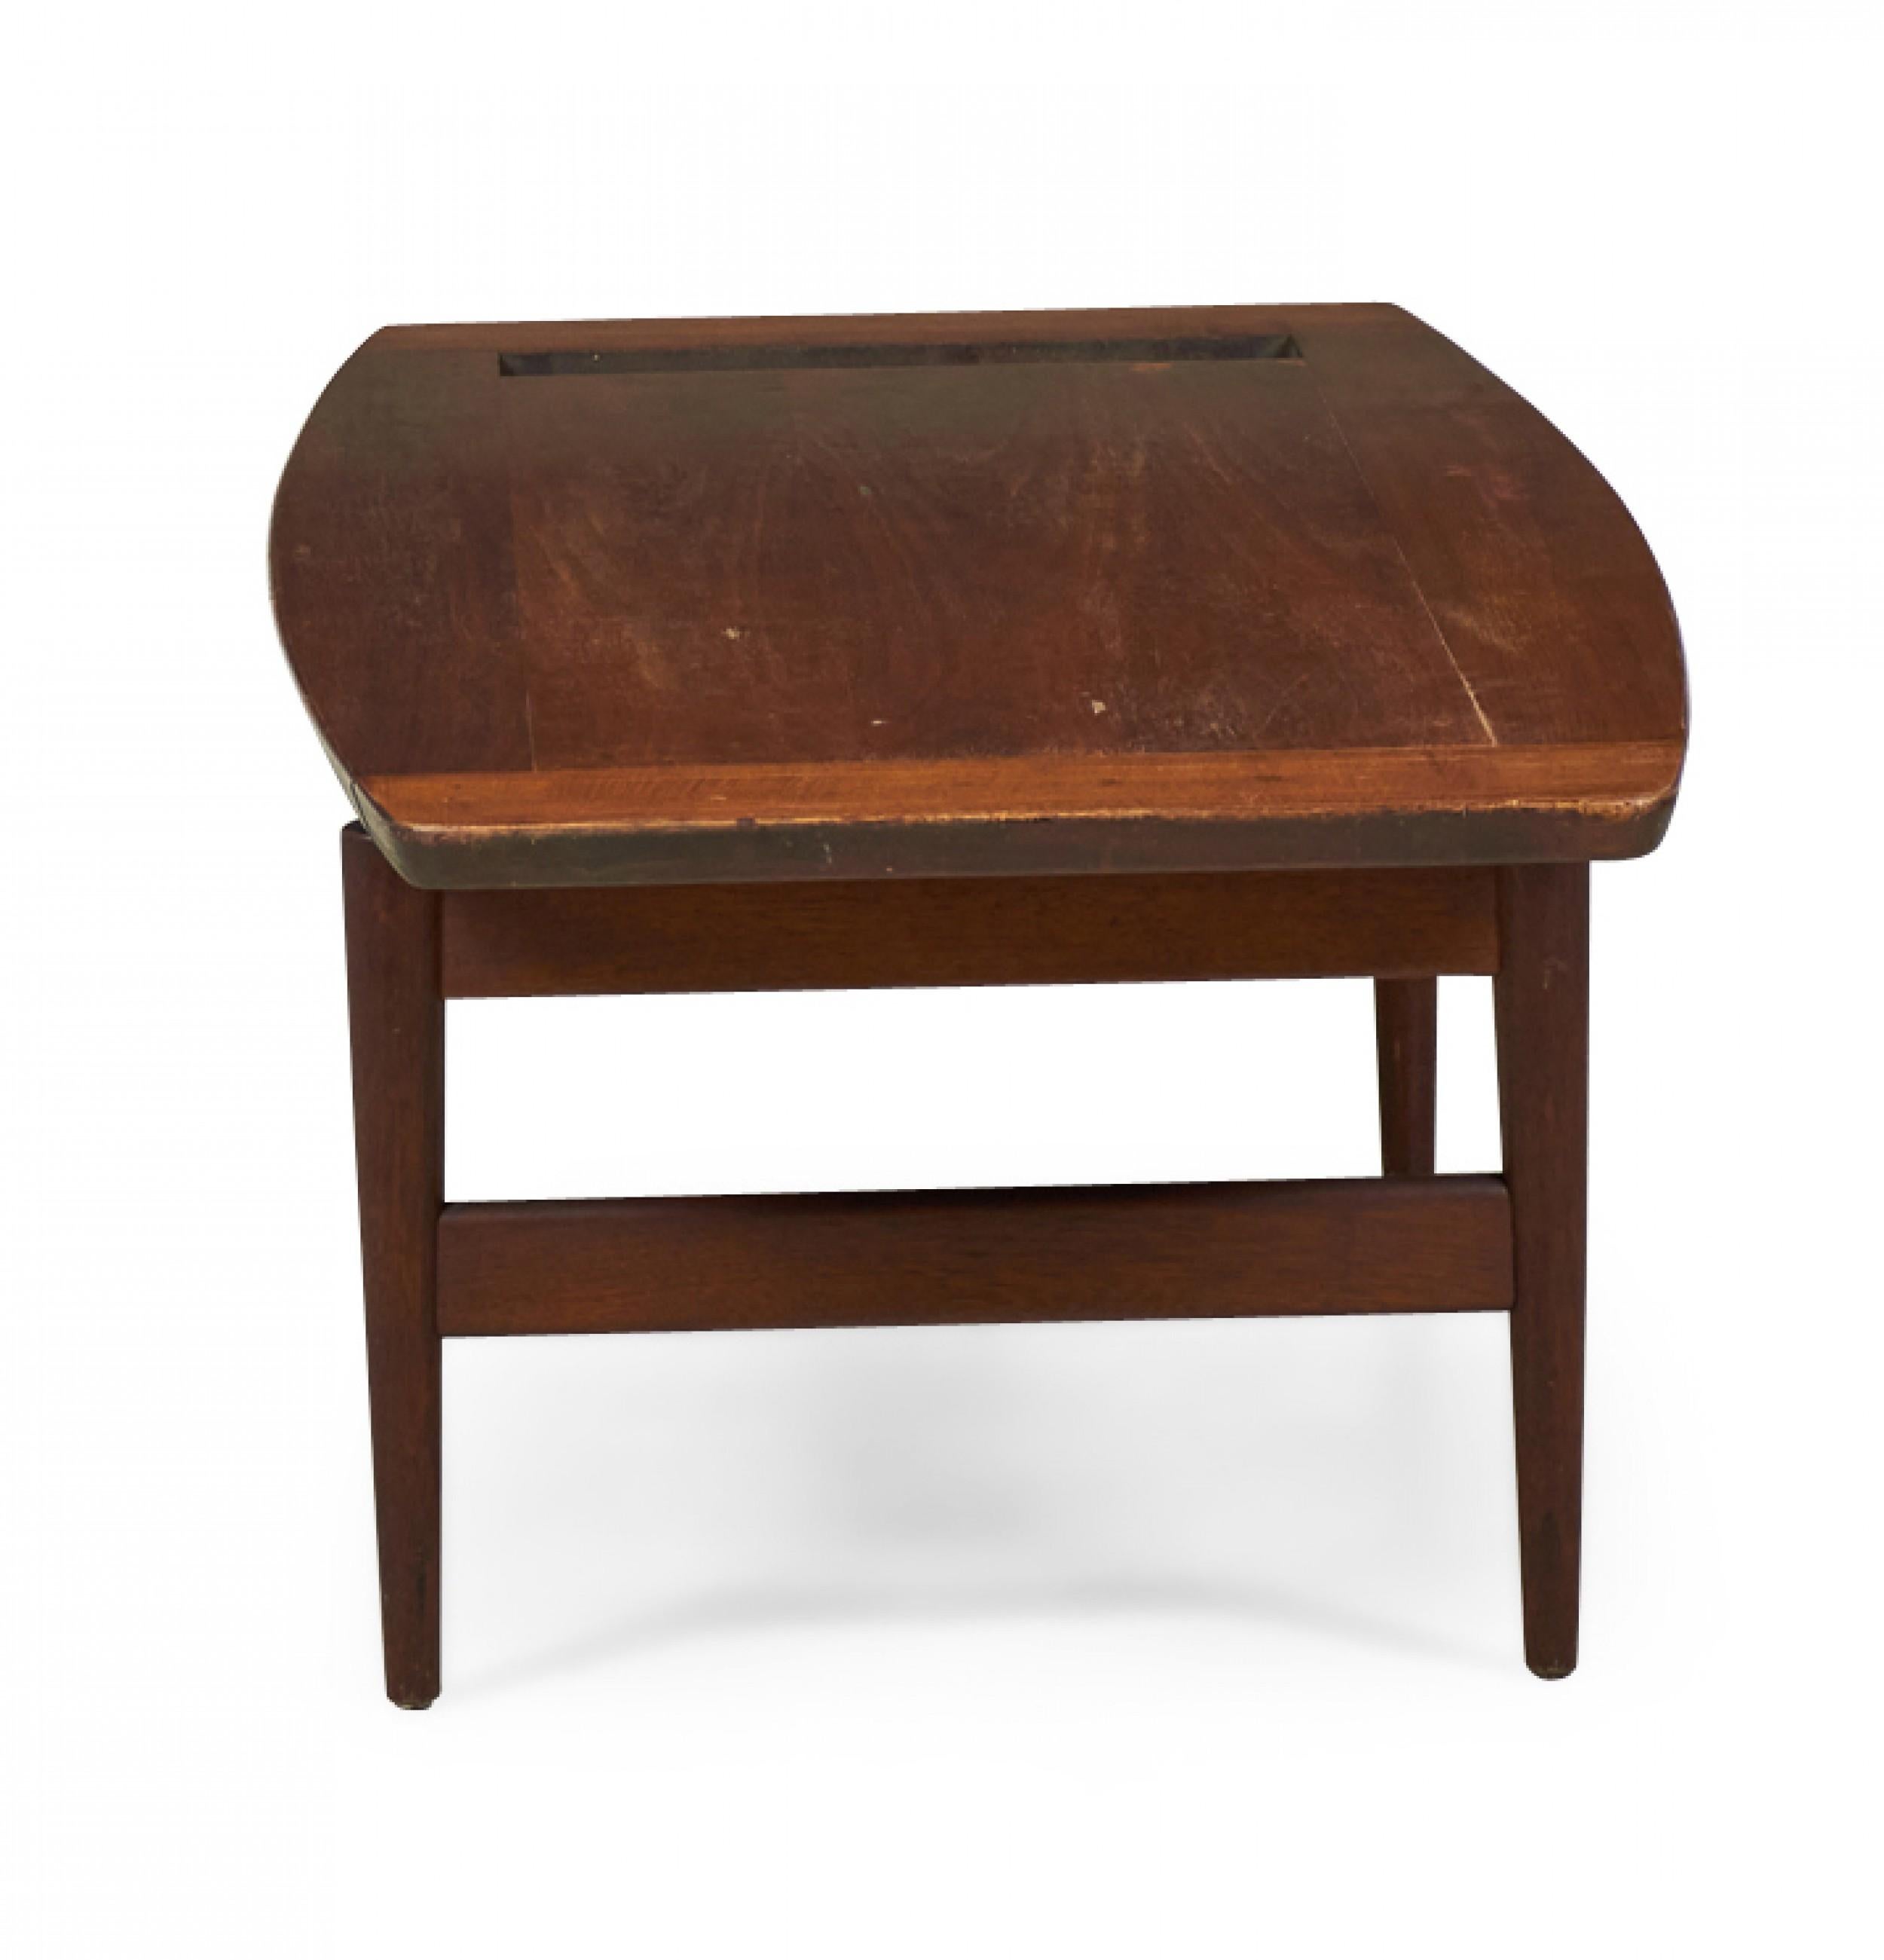 Danish Mid-Century walnut coffee table with a rectangular top with tapered edges and a rectangular cutout on one side resting on a stretcher base with built-in magazine rack and four tapered legs. (JENS RISOM) (Similar table: DUF0098B)
